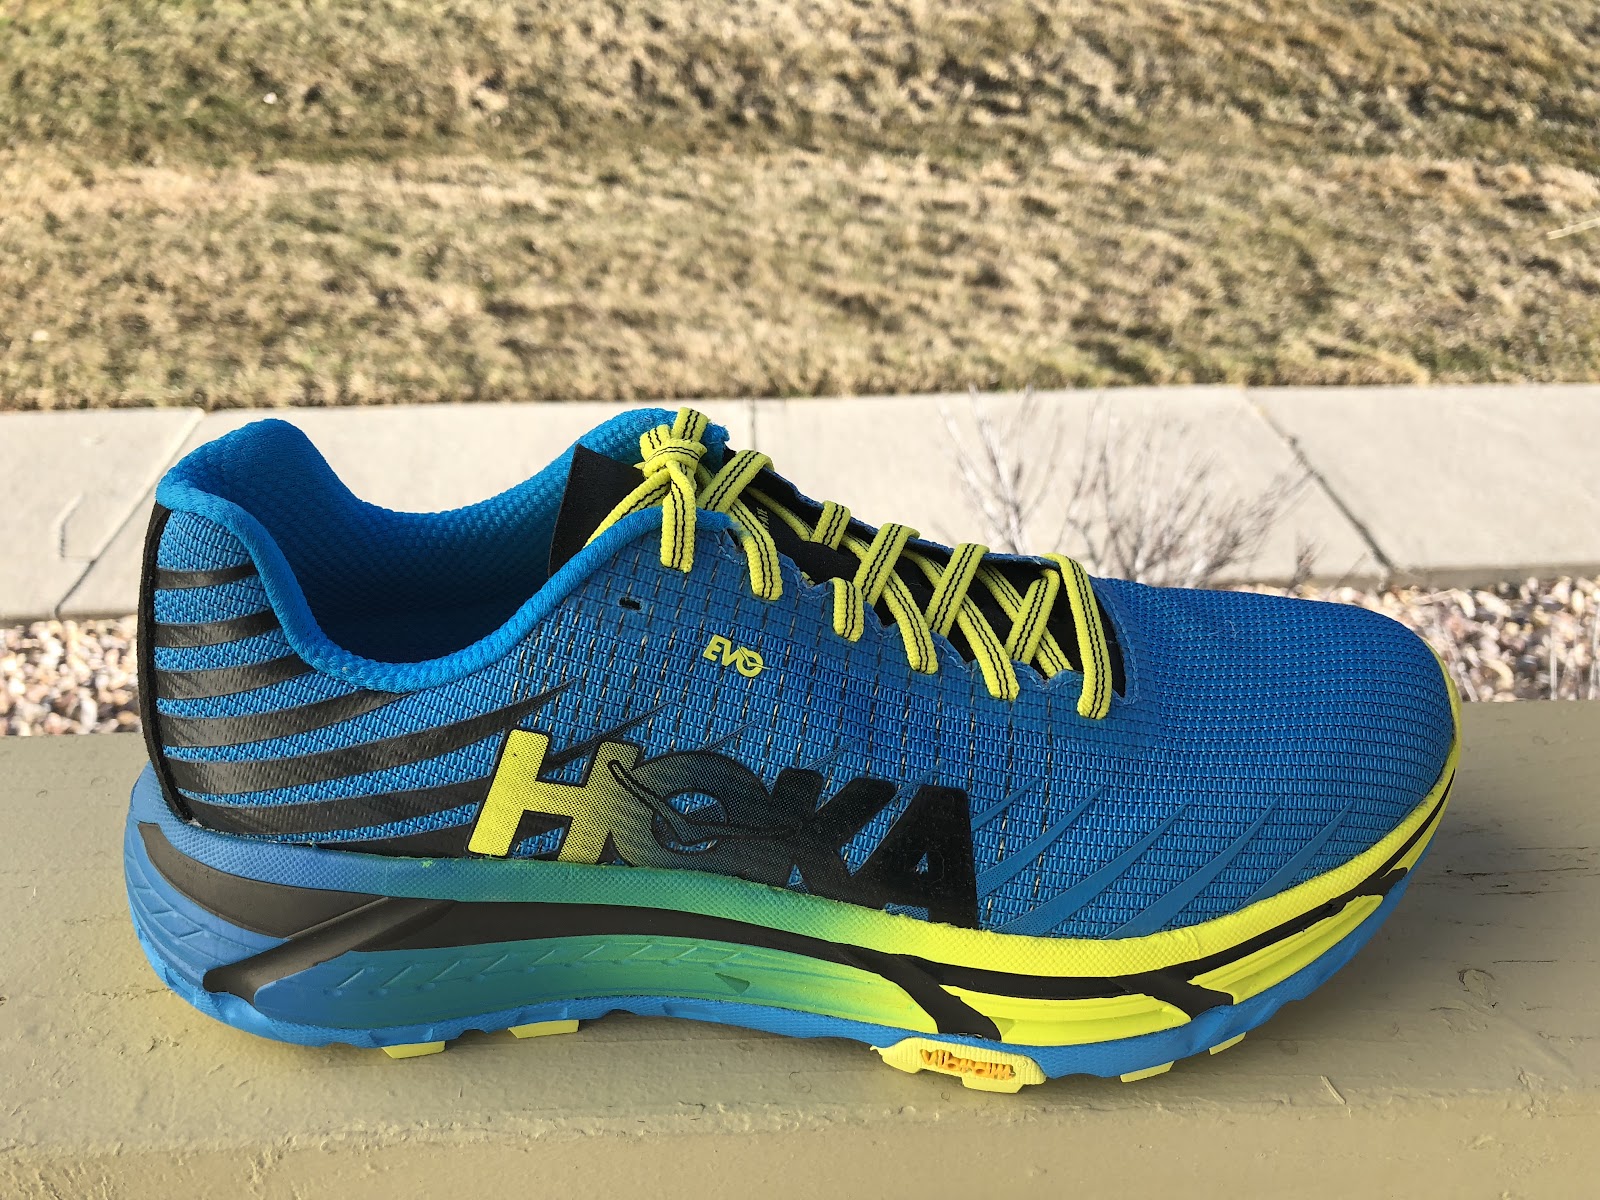 Road Trail Run: Hoka One One EVO Mafate 100 Plus Mile Updated Review:  Maximal Cushion, Highly Responsive, All Terrain Racer and Trainer